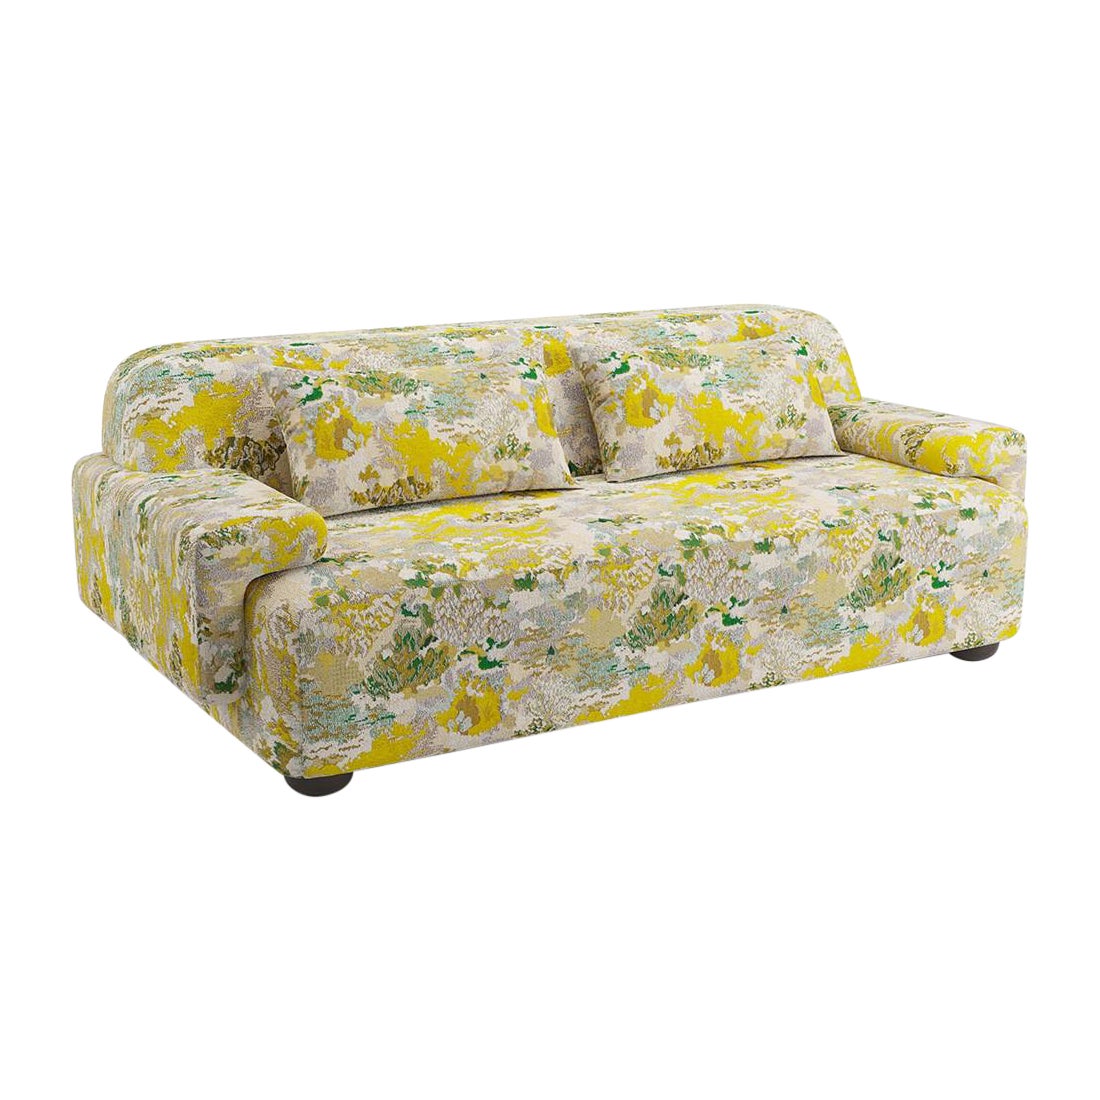 Popus Editions Lena 2.5 Seater Sofa in Citrine Marrakech Jacquard Upholstery